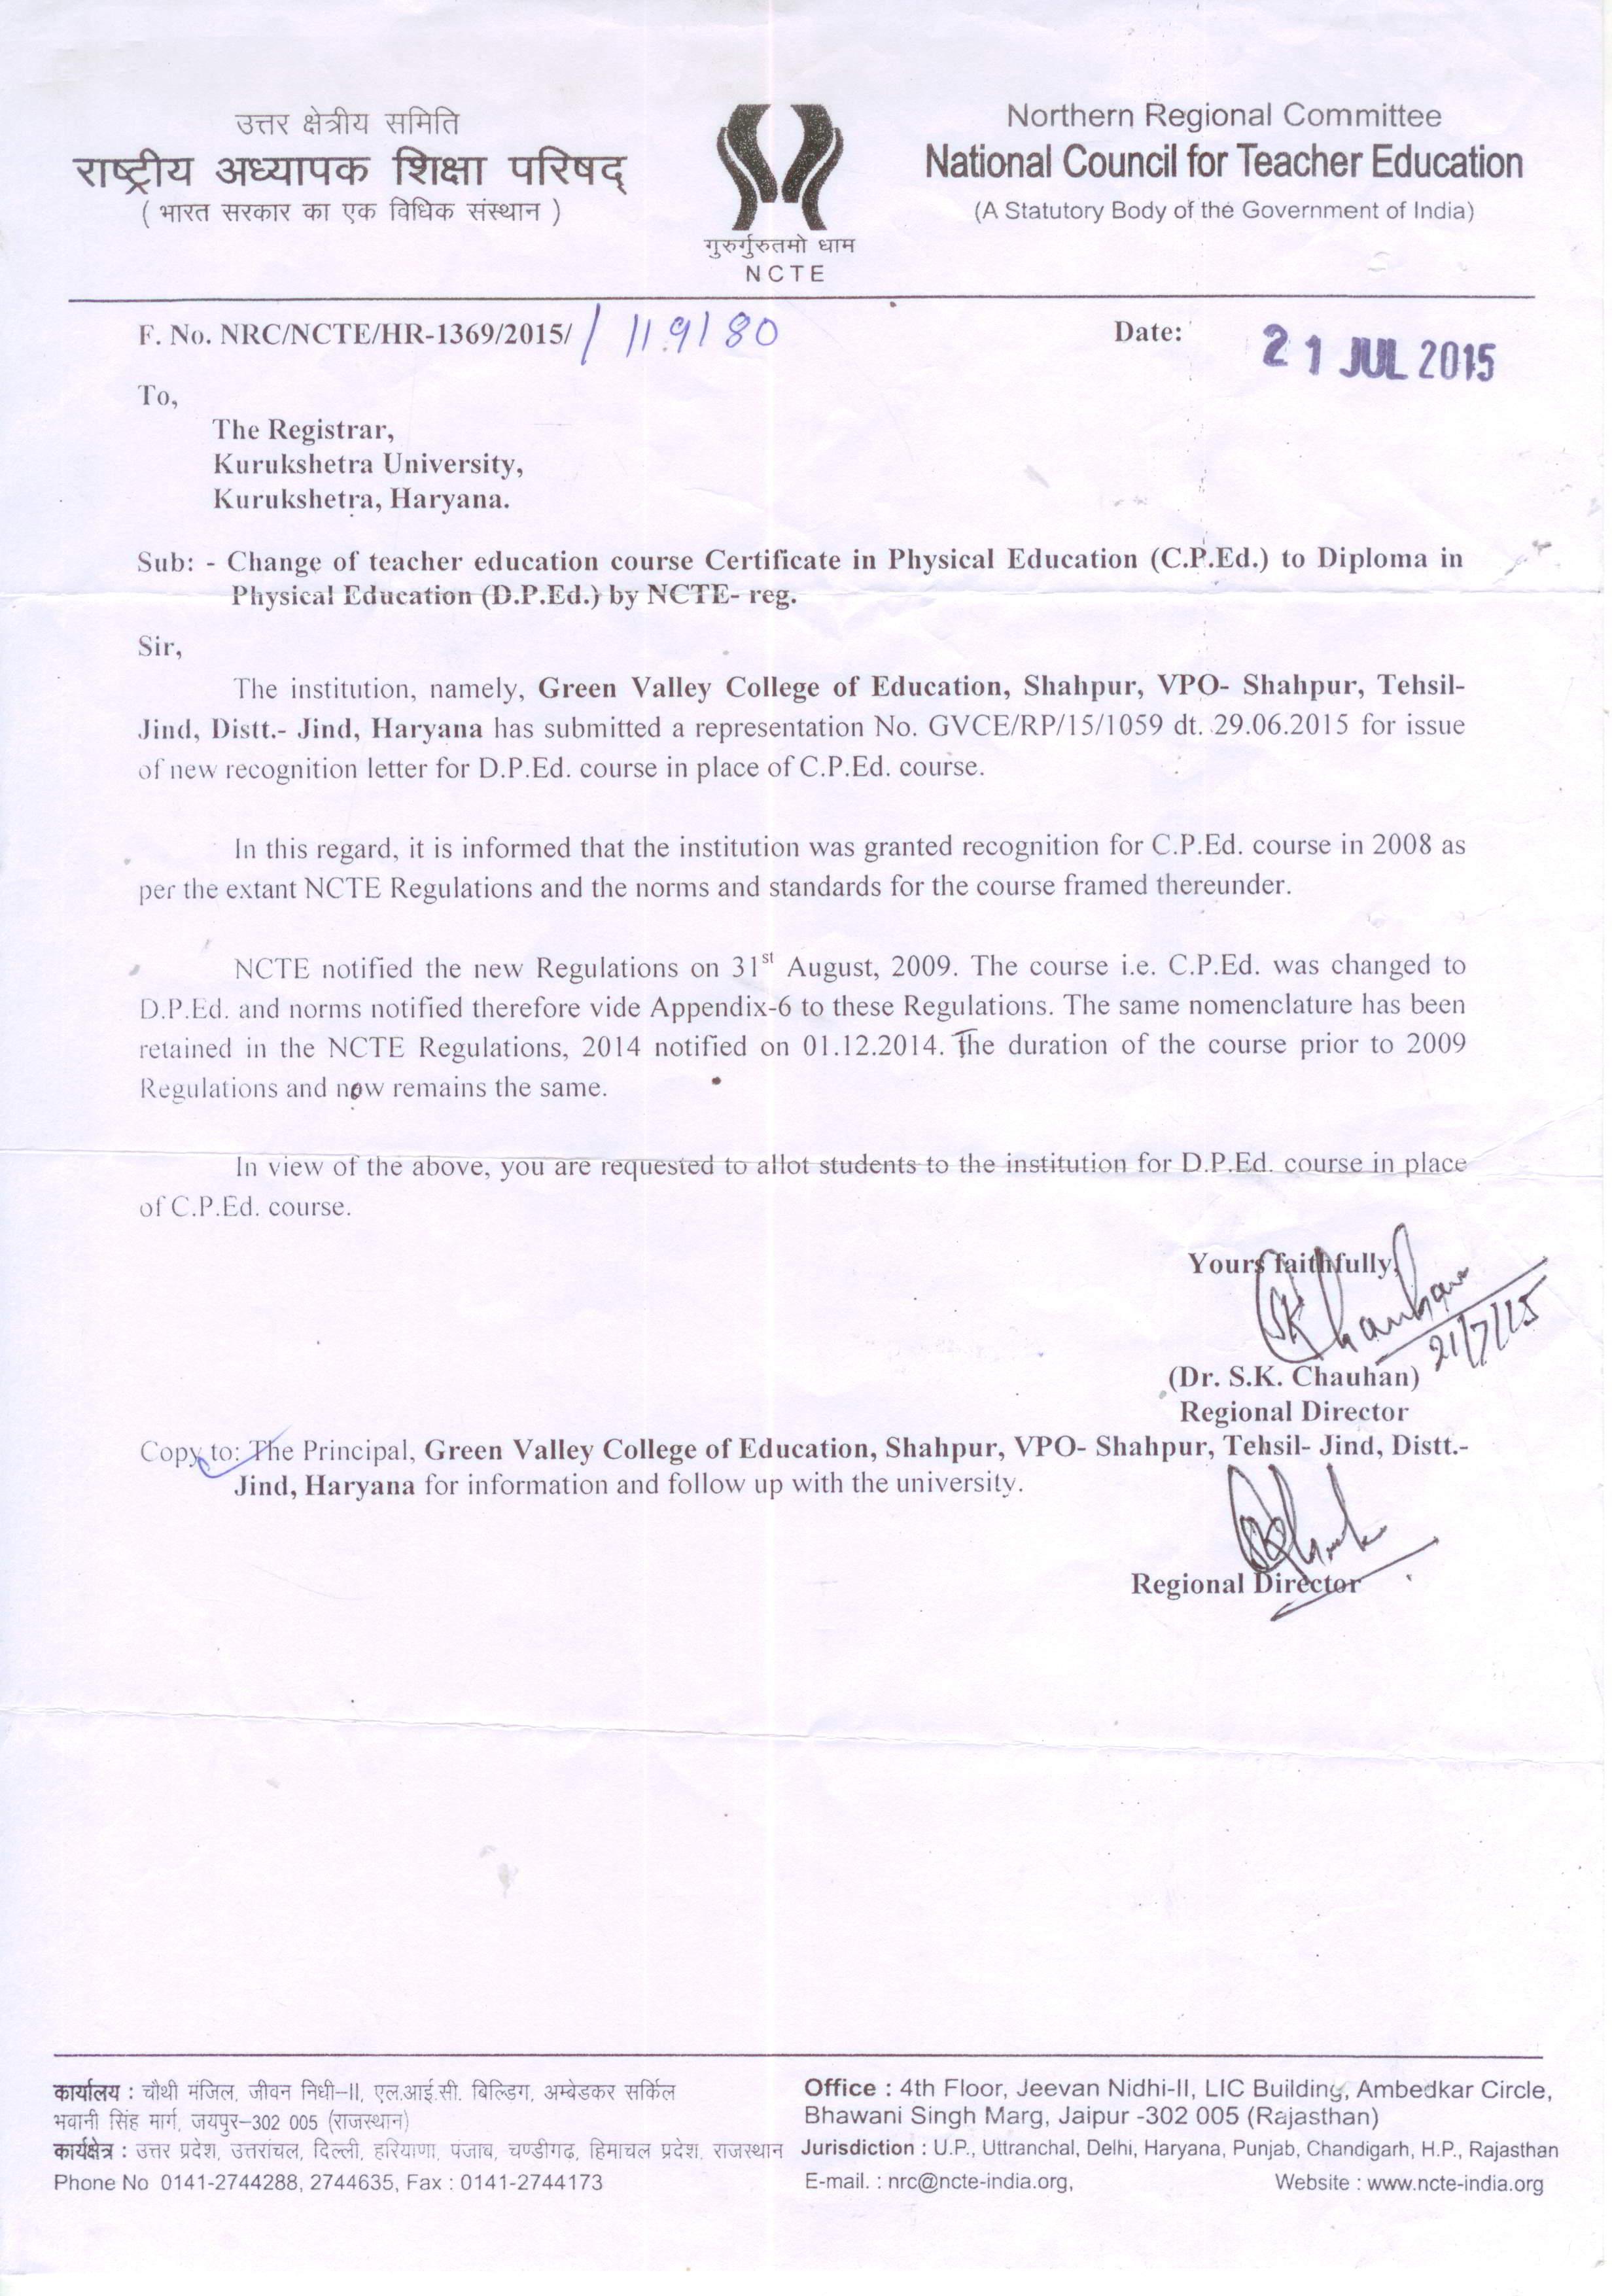 Nomenclature Change CPEd to D.P.Ed. Letter 